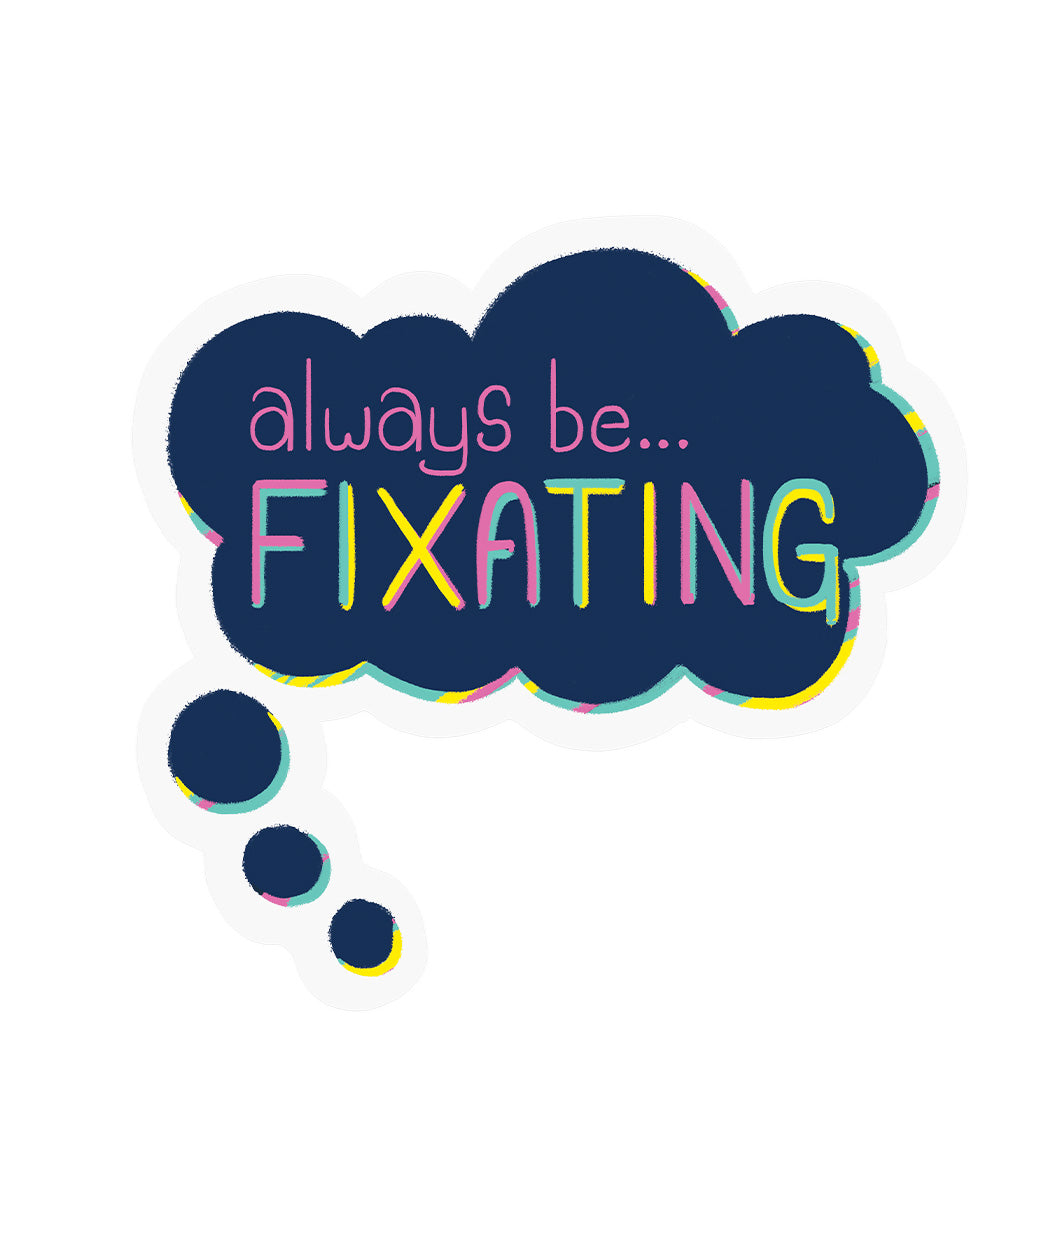 A dark blue thought bubble with a colorful border. The text in the bubble reads 